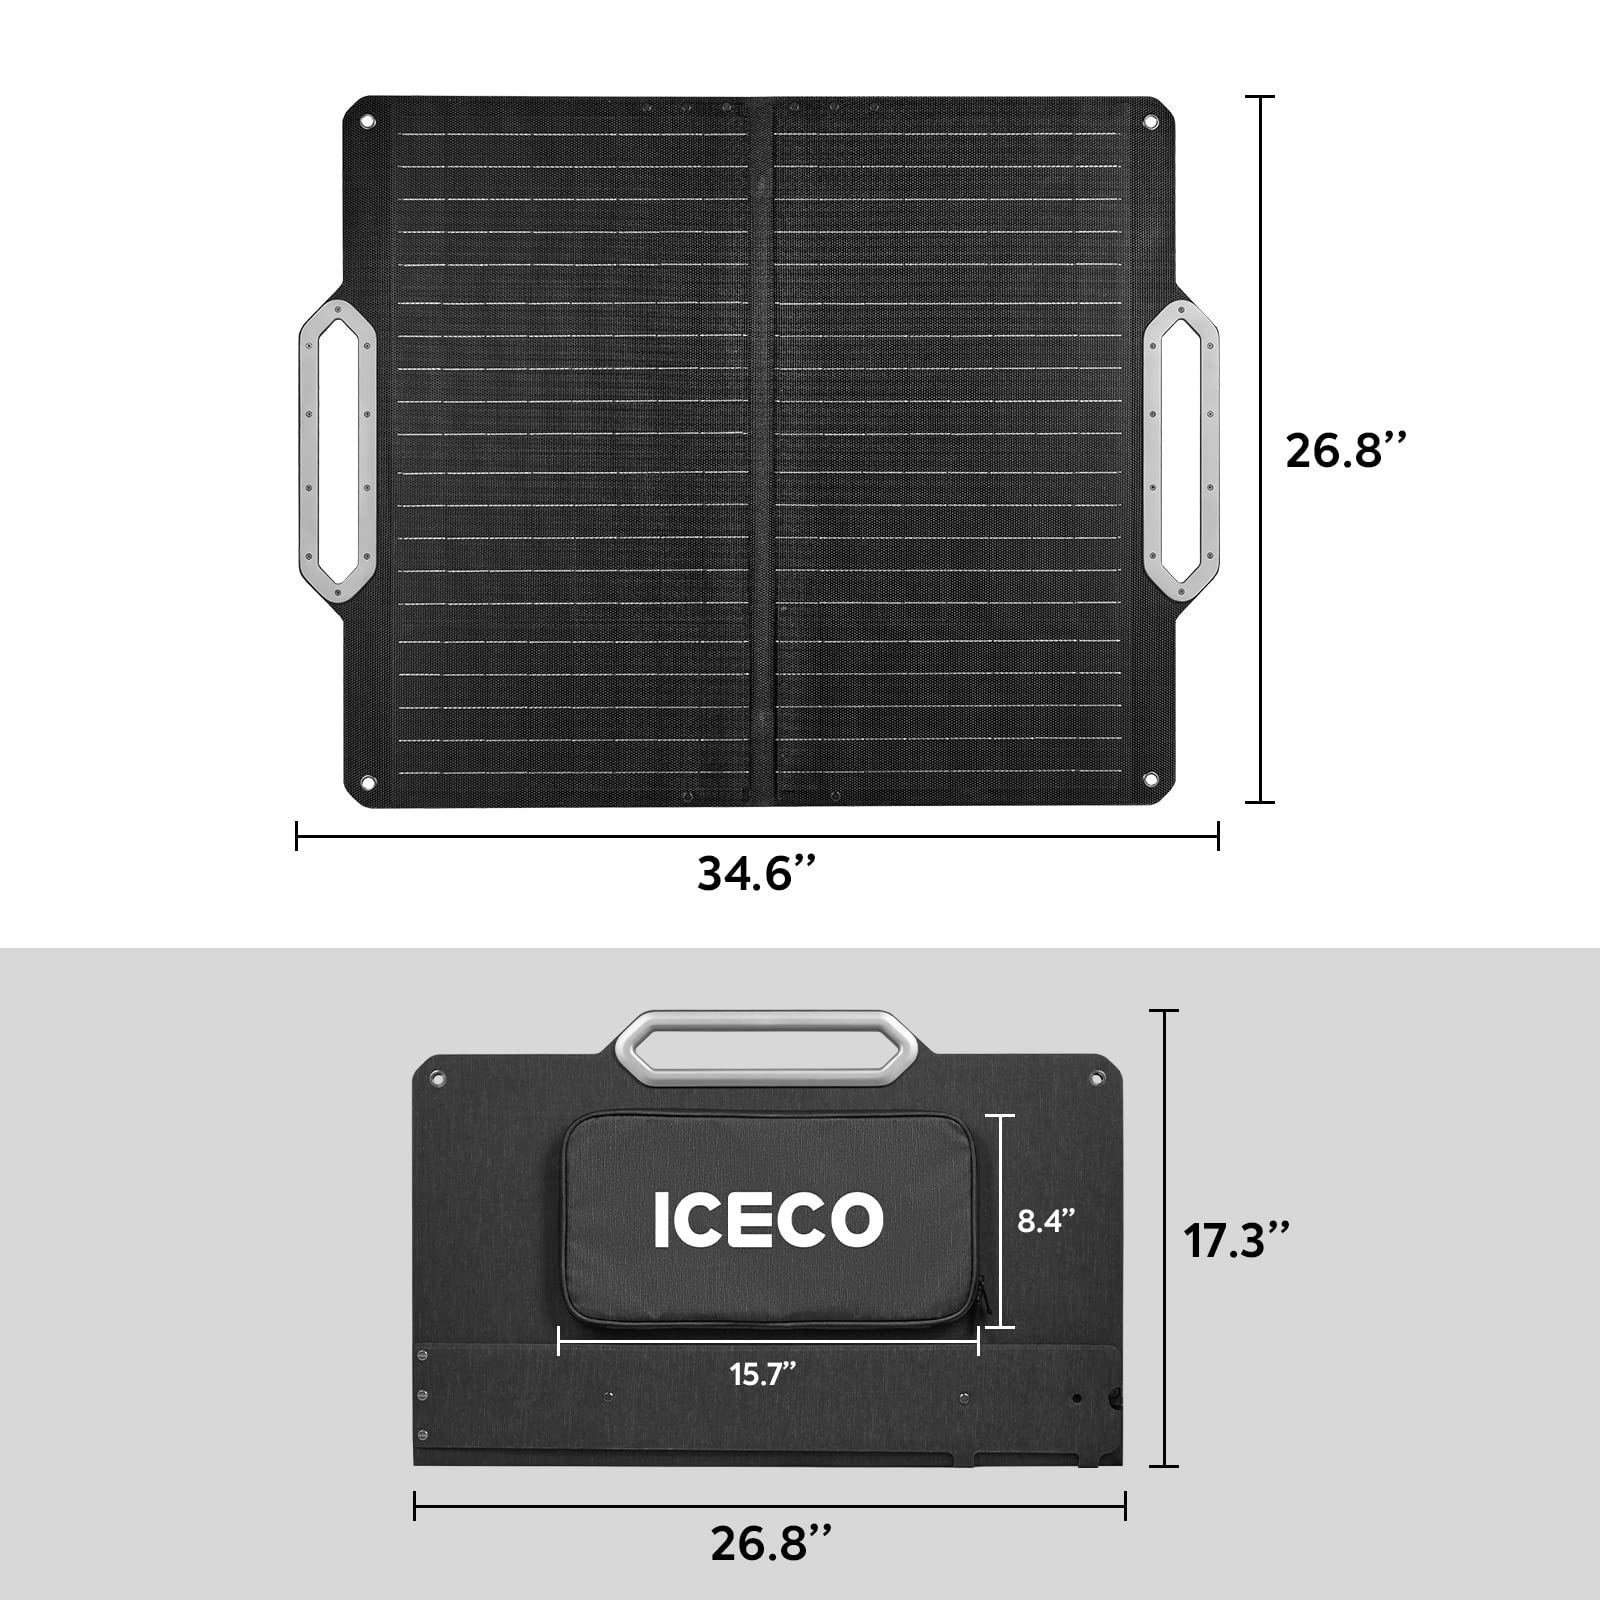 ICECO SP80 Portable Solar Panels 80W, High-Efficiency Monocrystalline Solar Panel, Foldable Solar Charger with Adjustable Kickstand, Waterproof IP67 for Outdoor, Camping, RV and Emergency Backup